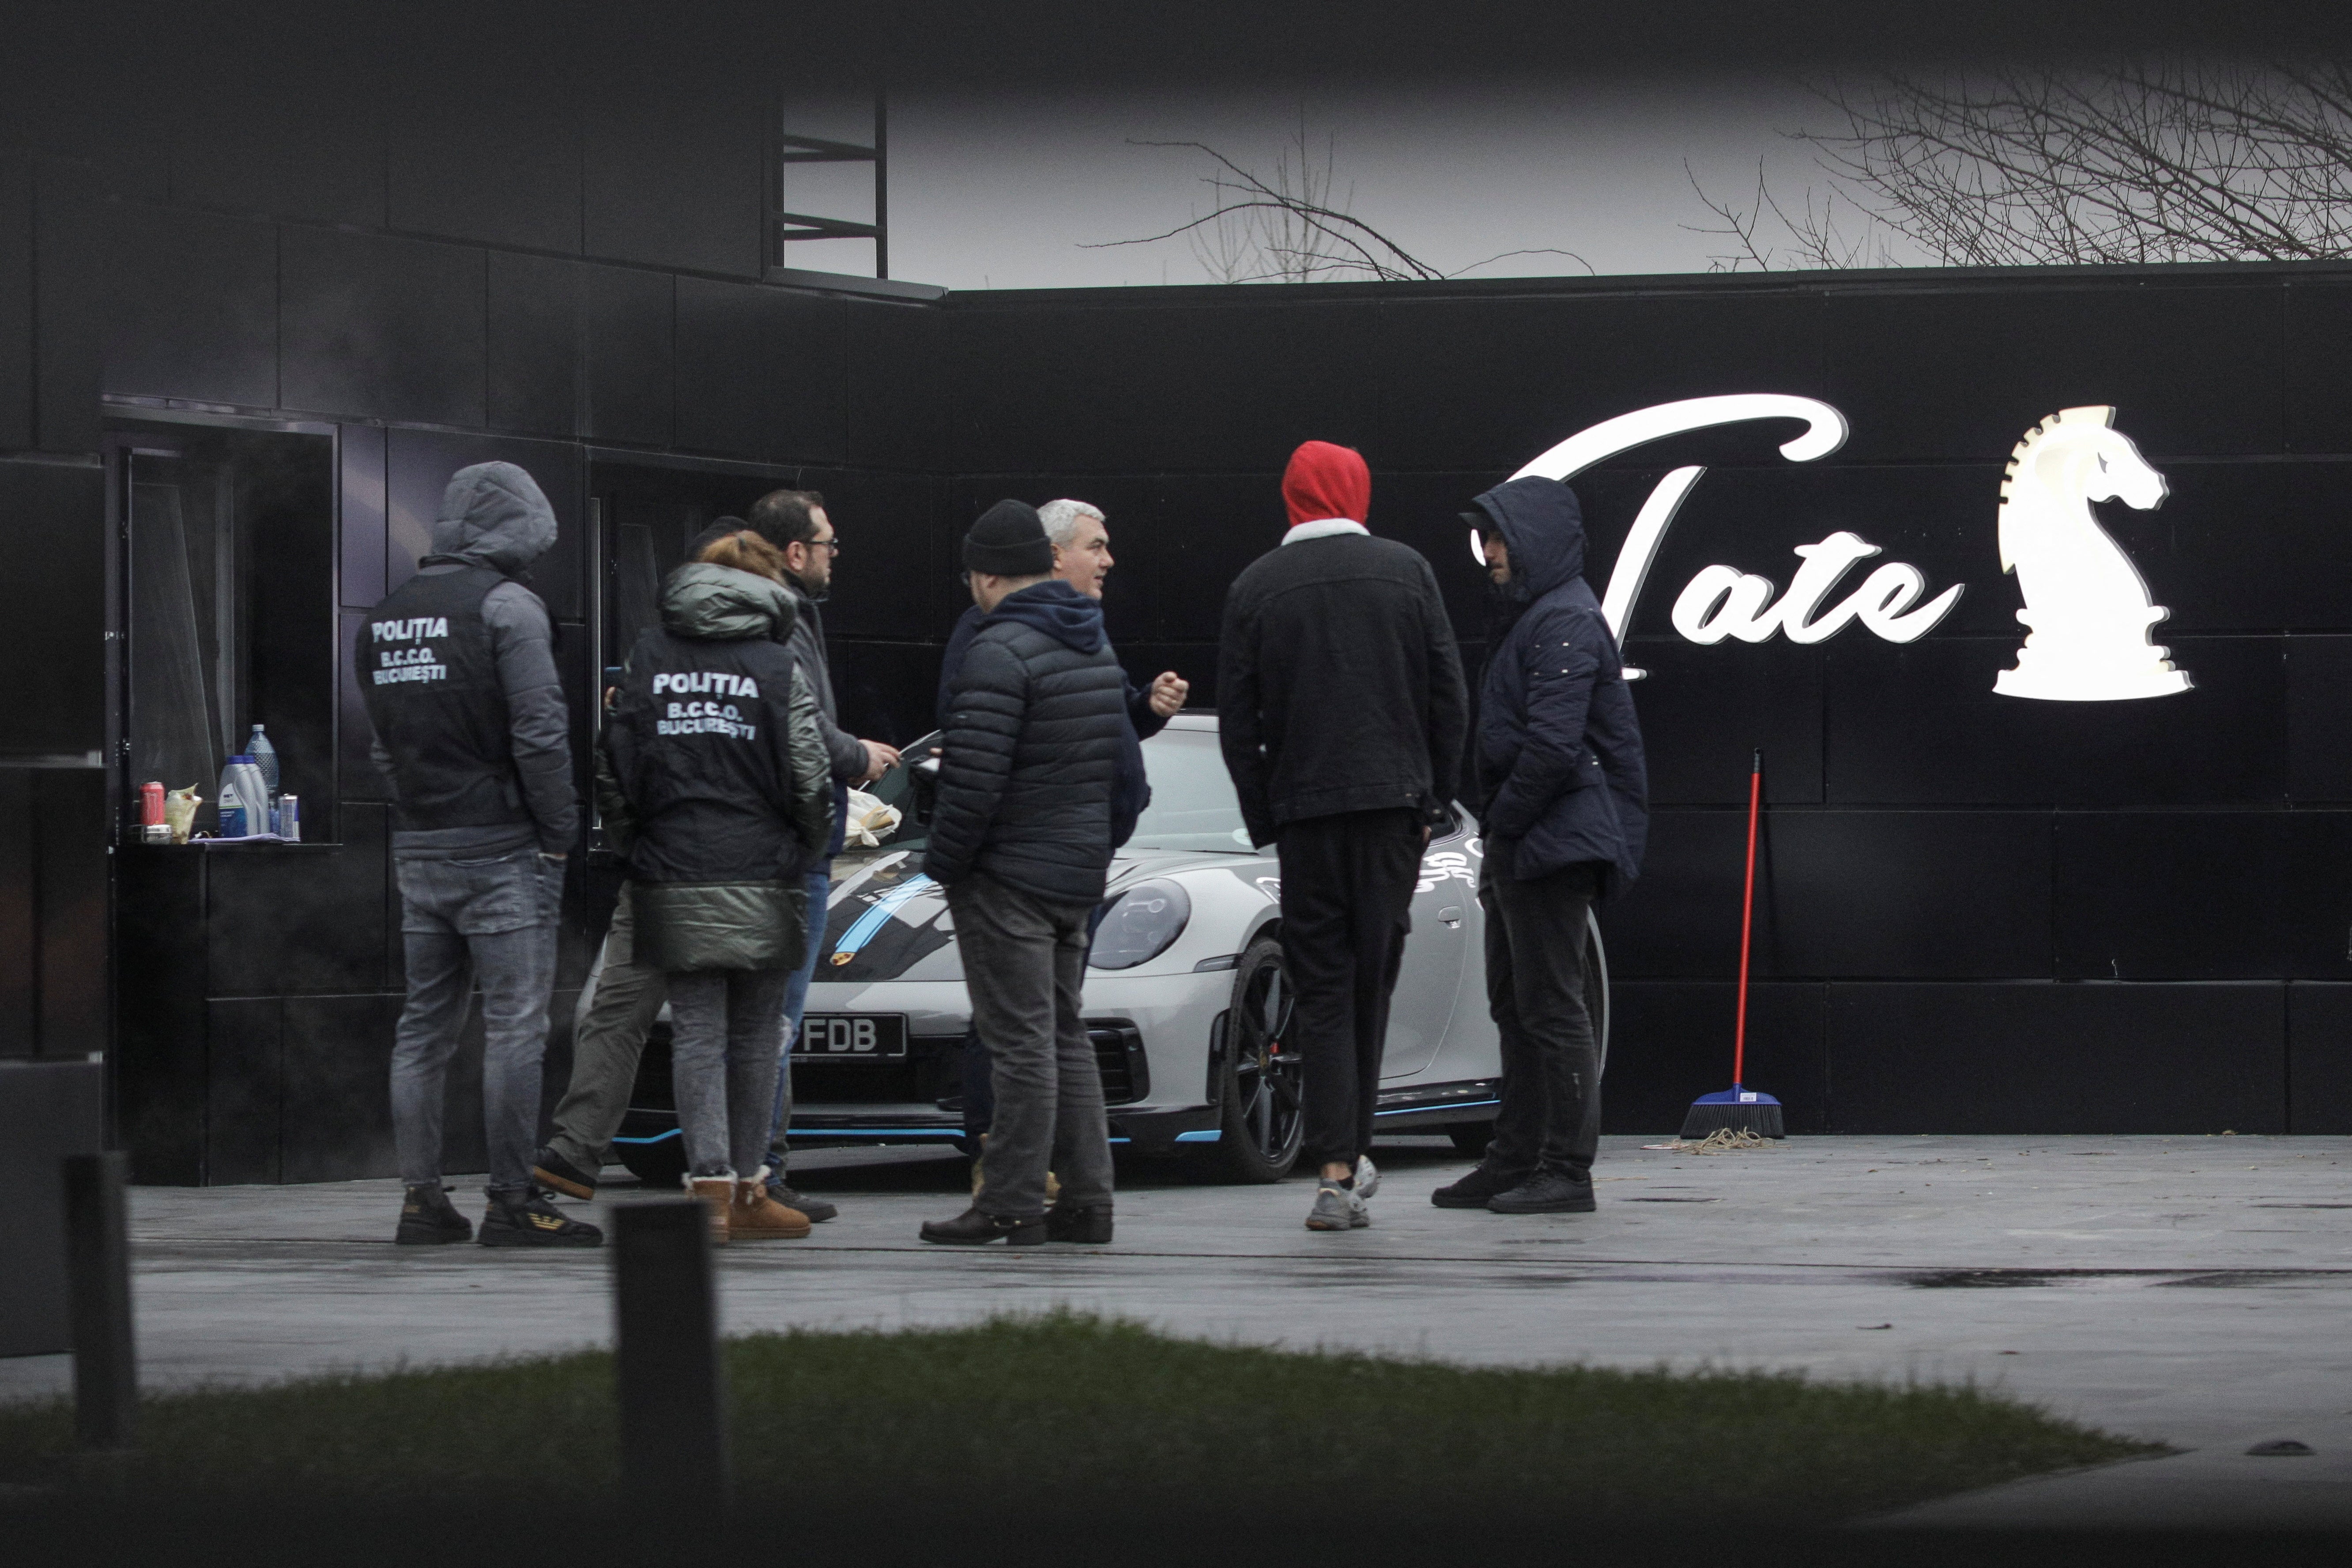 Romanian officials watch as the cars are taken away from Andrew Tate’s compound